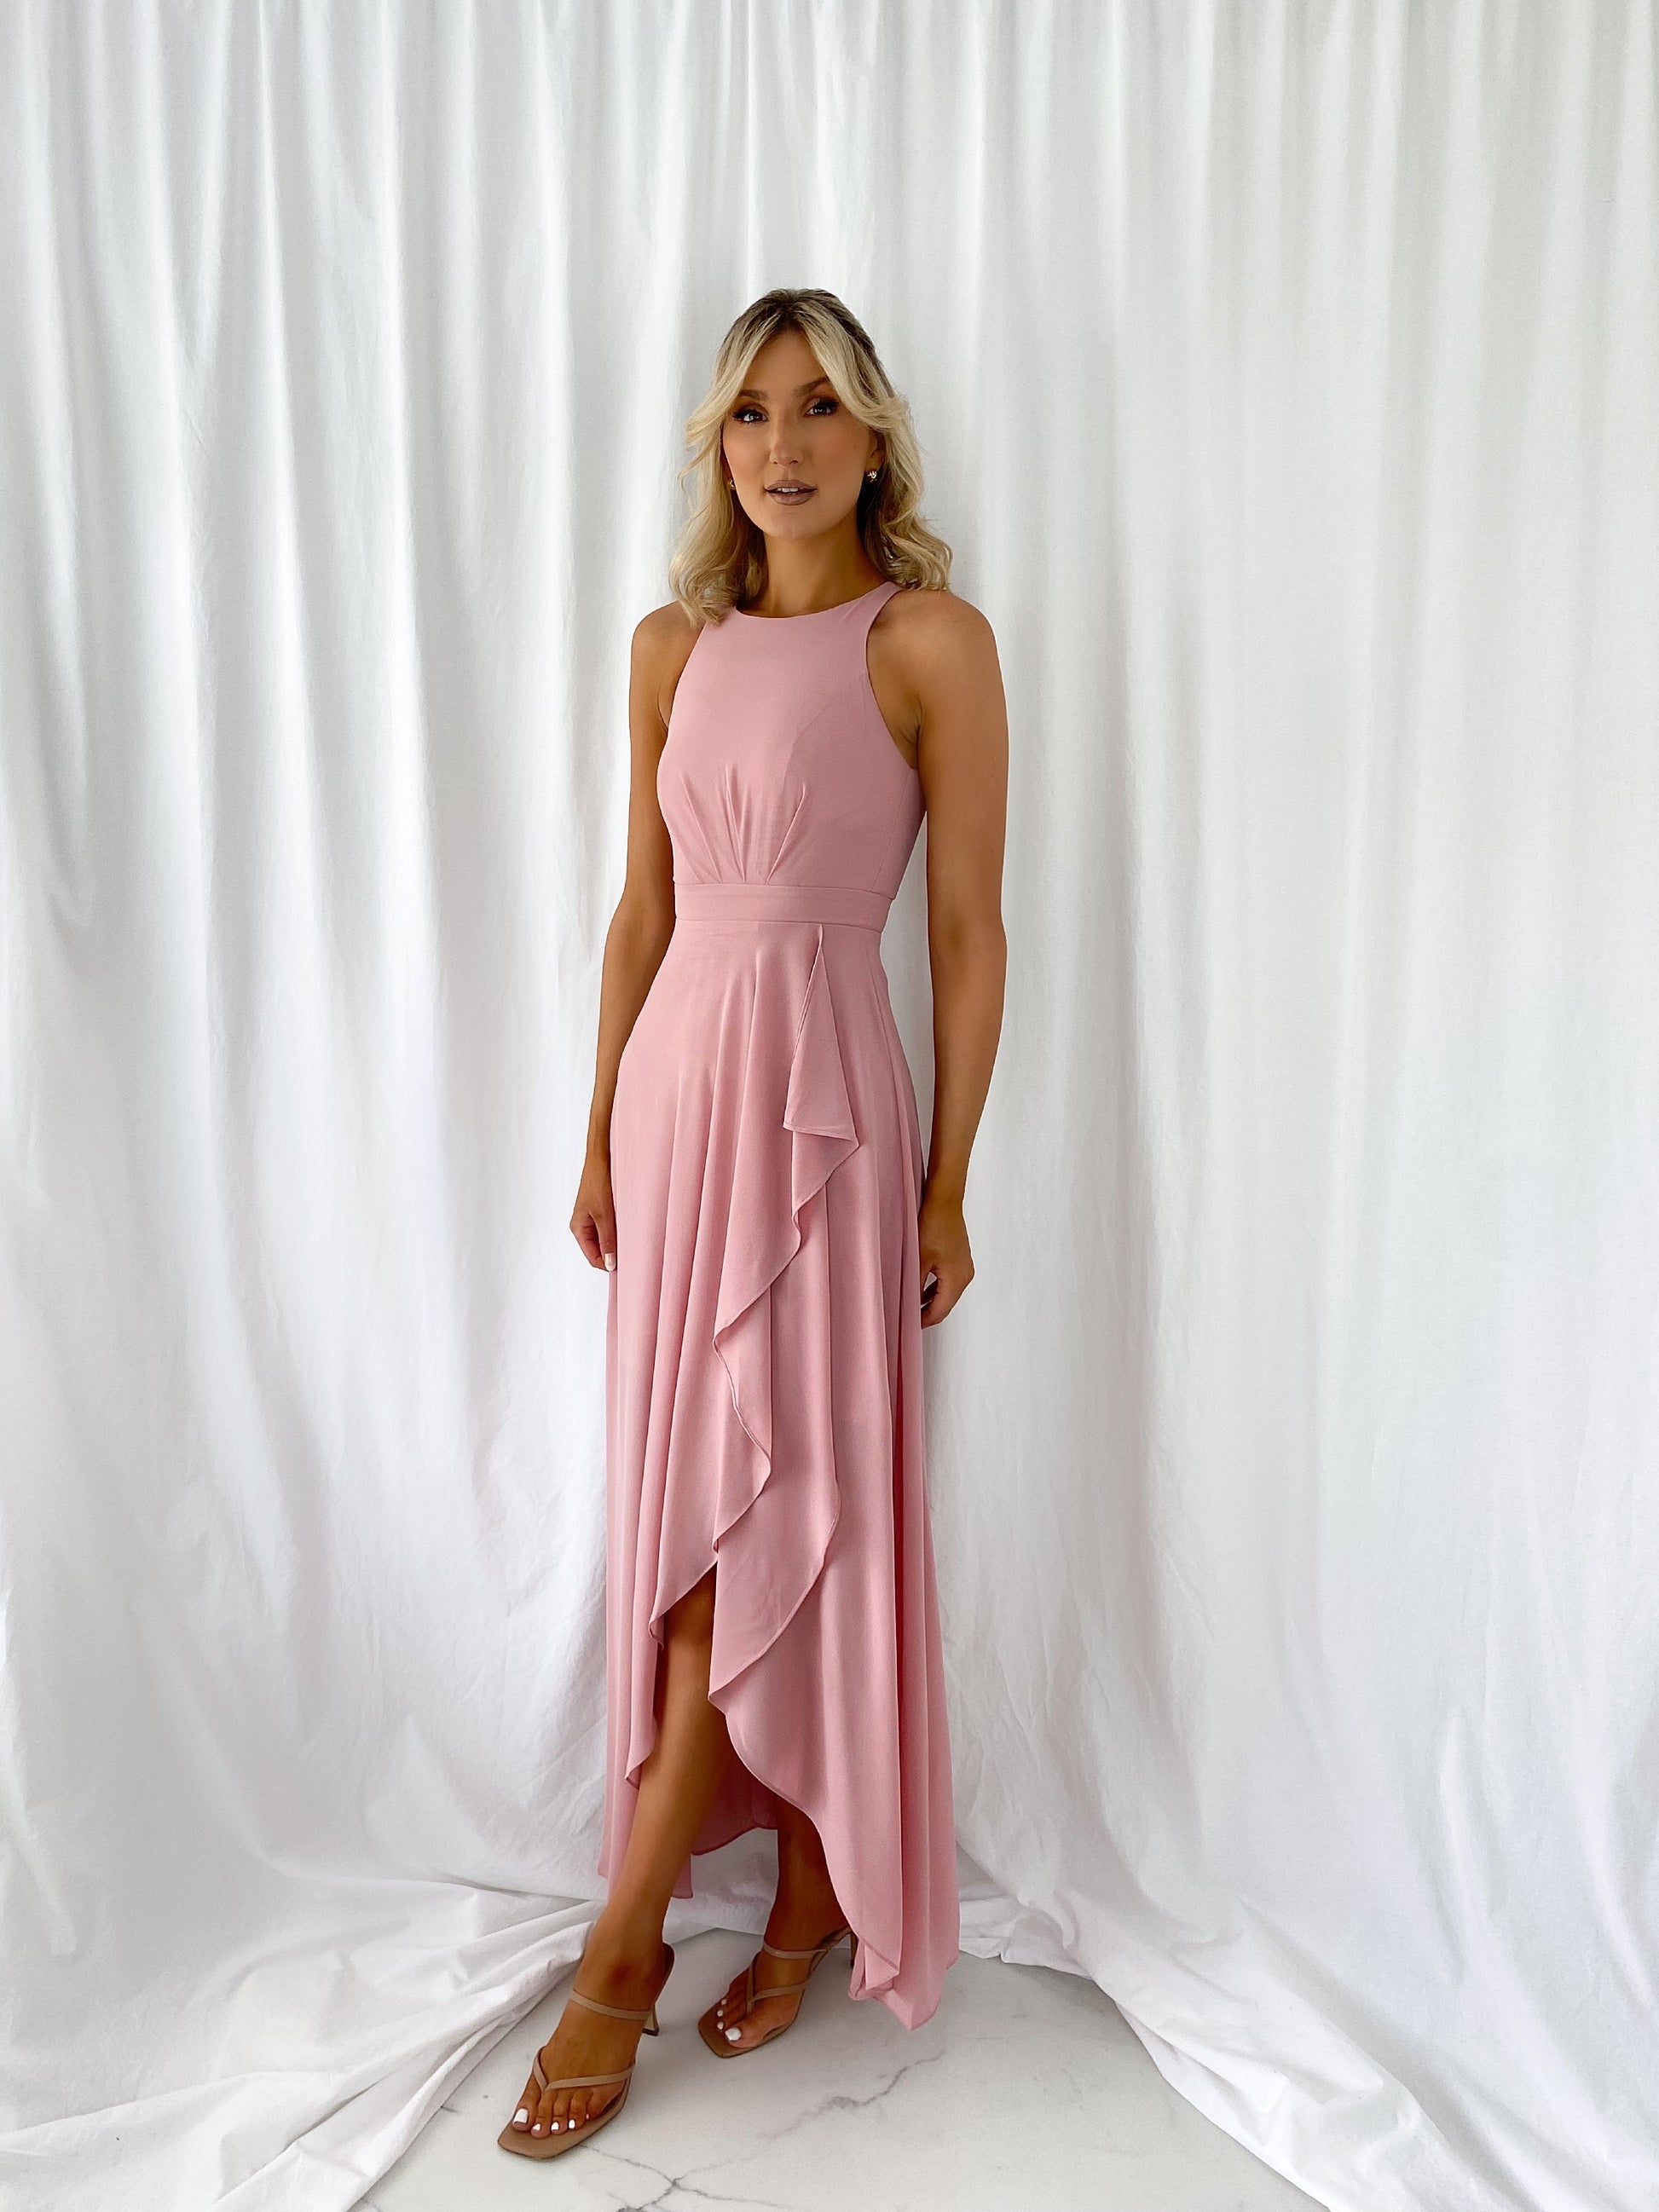 a woman in a pink dress standing on a bed 